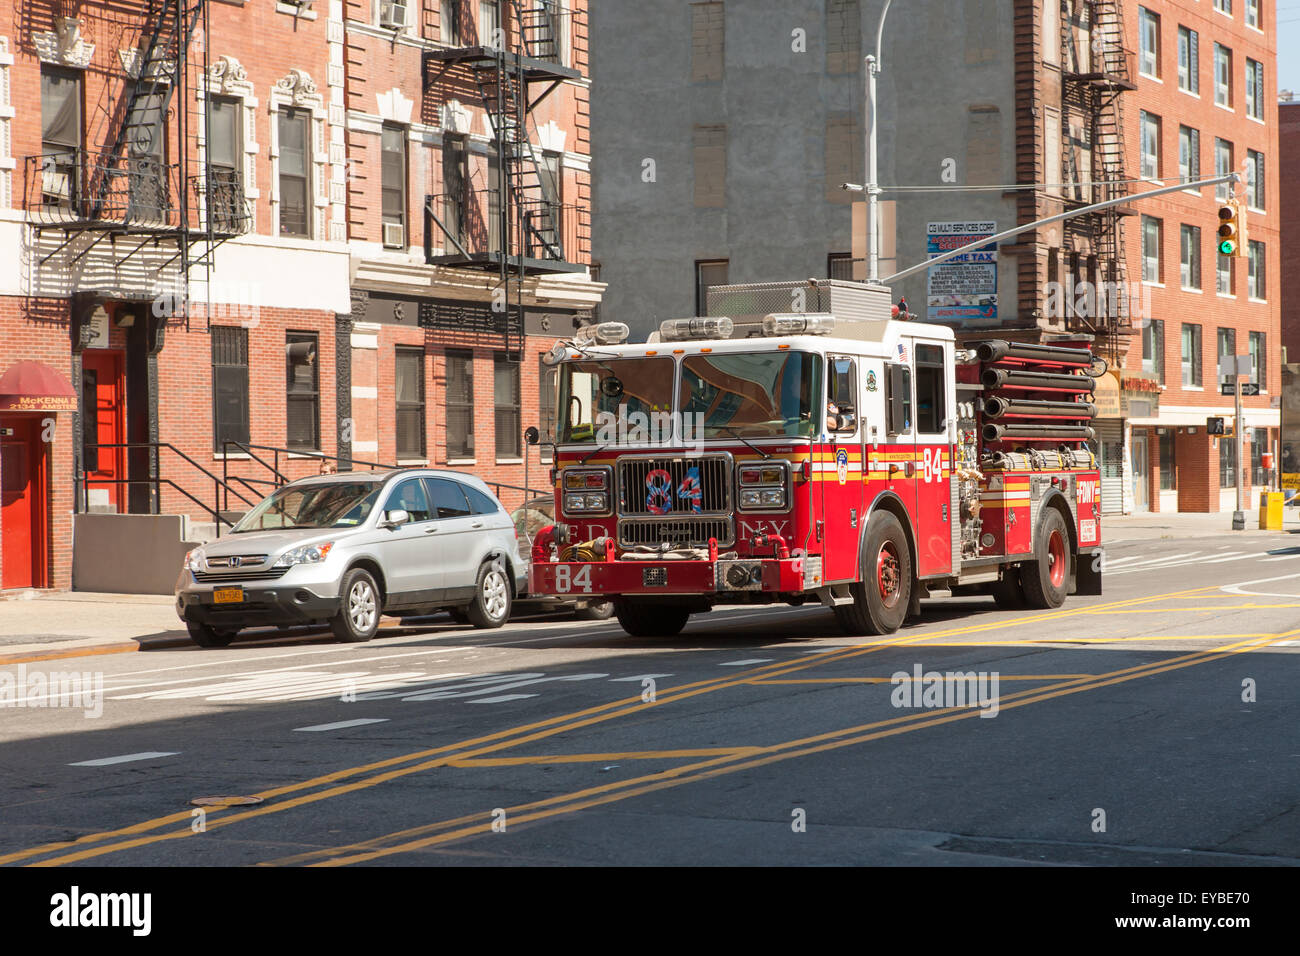 FDNY Engine 84 serving Hamilton Heights in New York City. Stock Photo